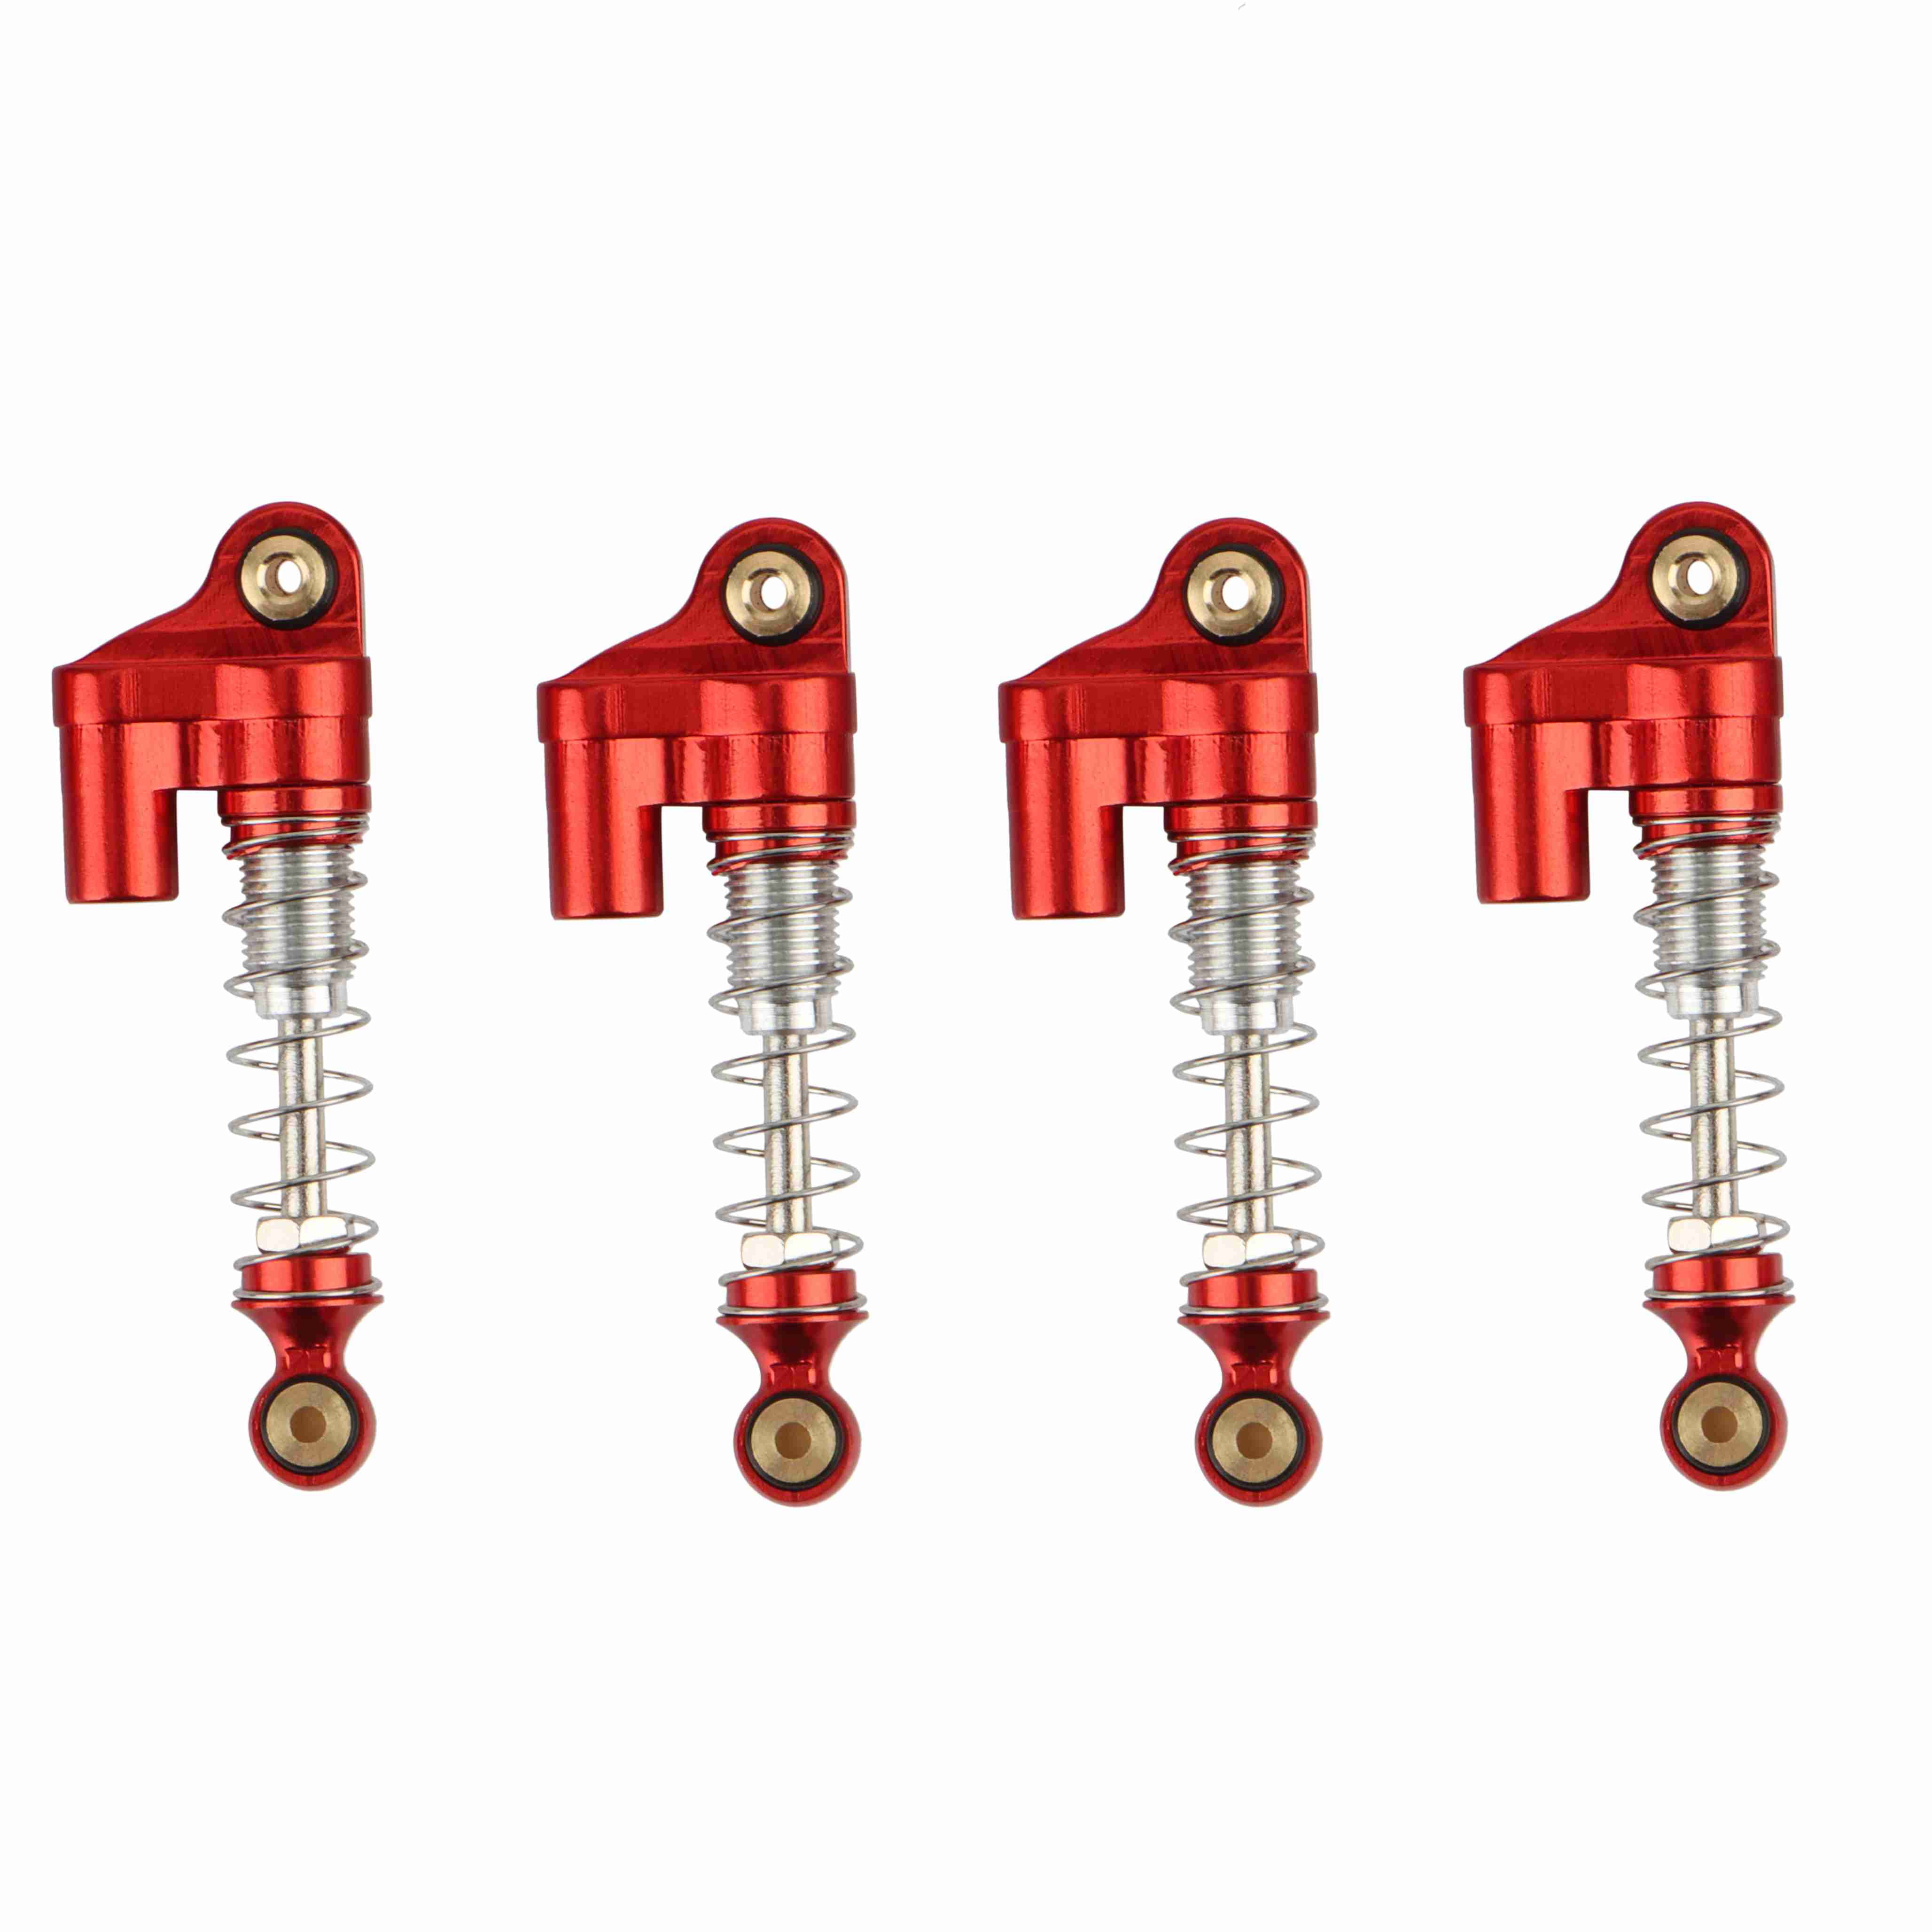 4PCS Aluminum Threaded Shock Absorber Kit For 1/24 RC Crawler Axial SCX24 90081